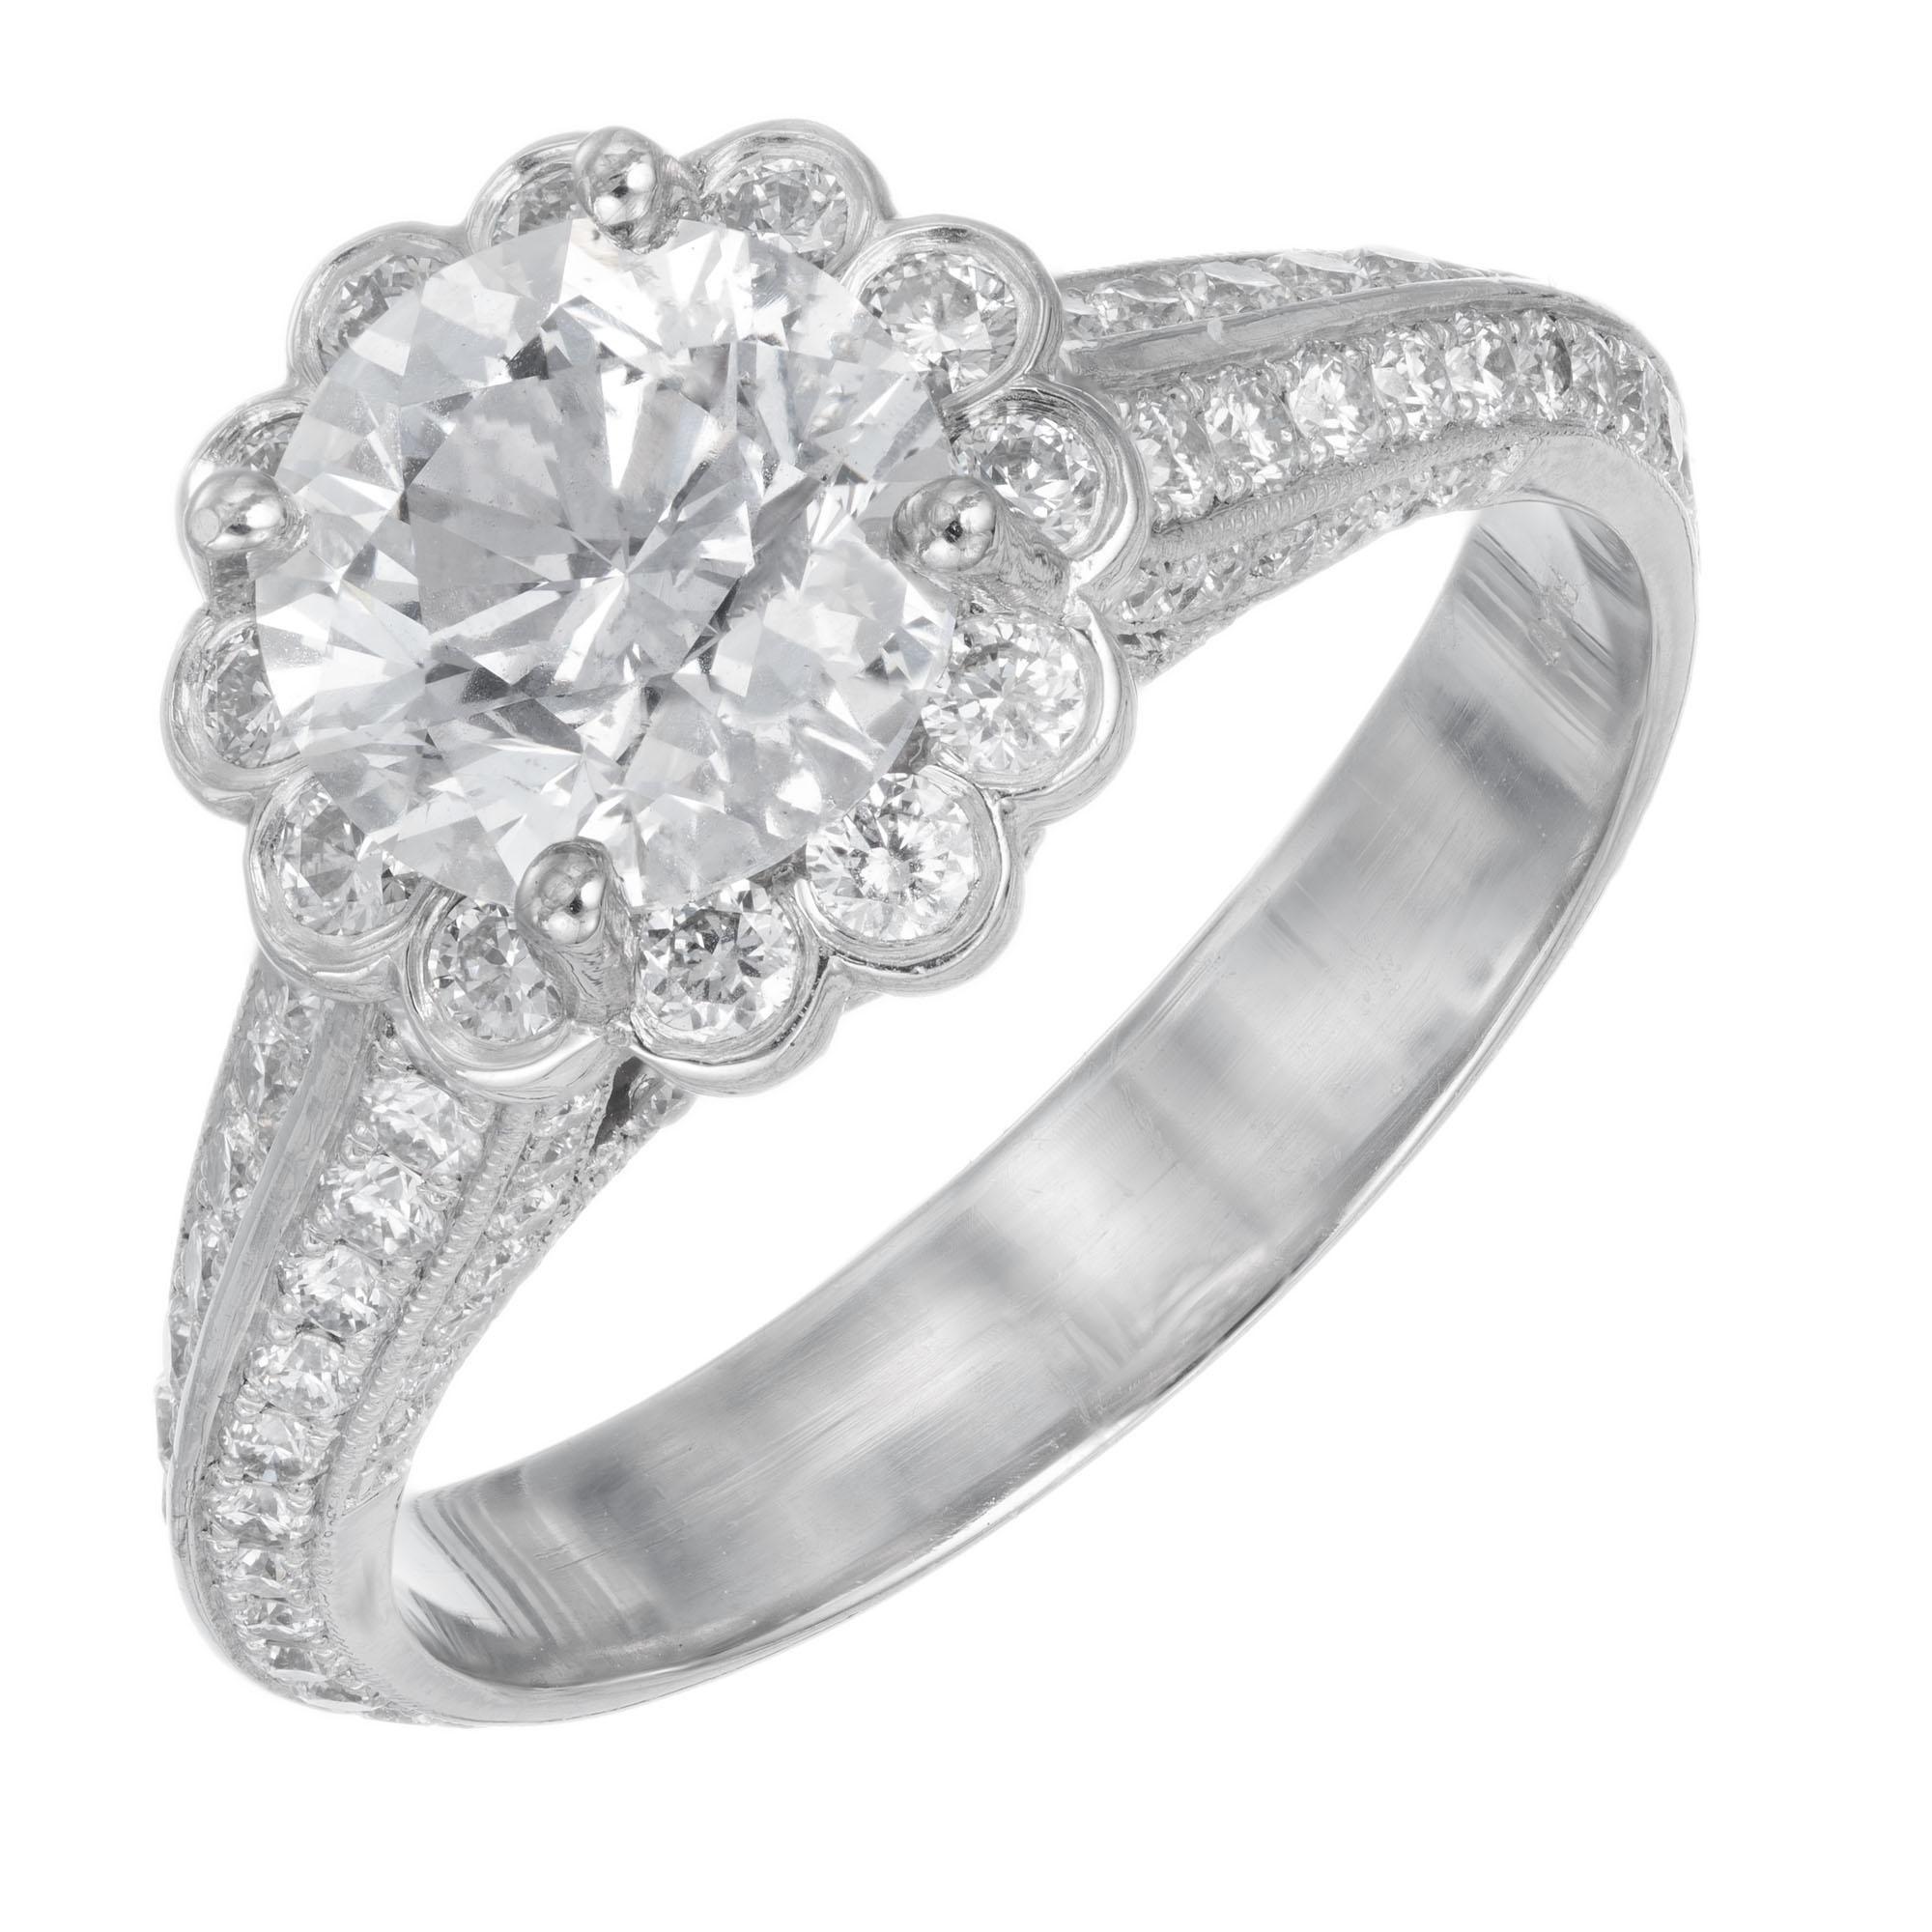 Diamond engagement ring. EGL certified round center stone with a scalloped halo of round diamonds in a  micro pave diamond platinum setting. Created in the Peter Suchy Workshop. 

1 round brilliant cut diamond, approx. total weight 1.55cts, F, I1 